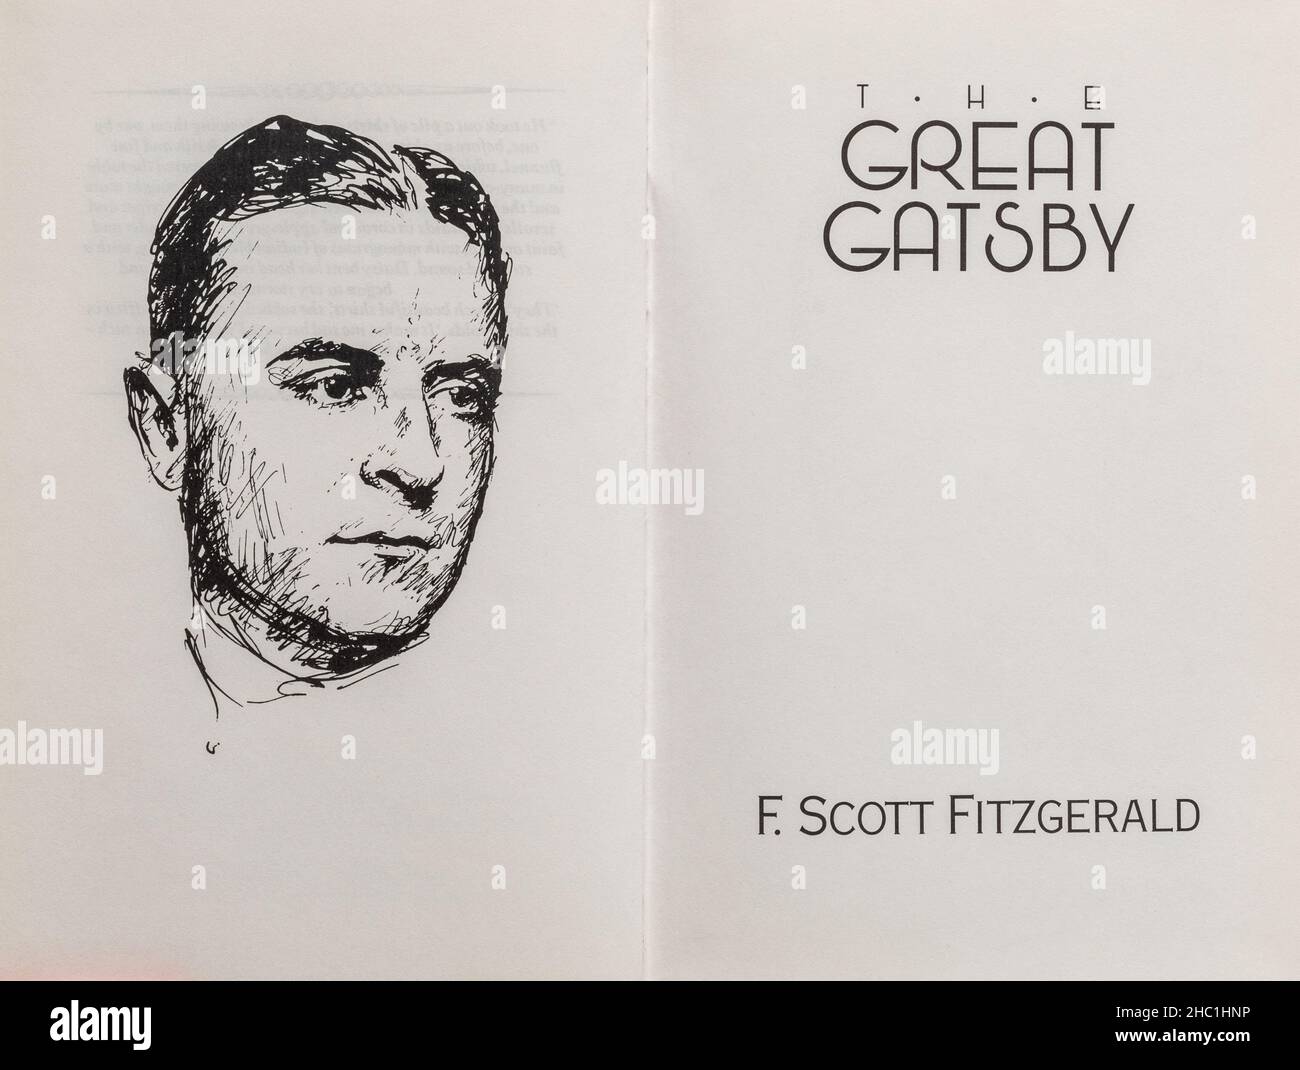 The Great Gatsby book - classic novel by F. Scott Fitzgerald. Title page and drawing of the author. Stock Photo